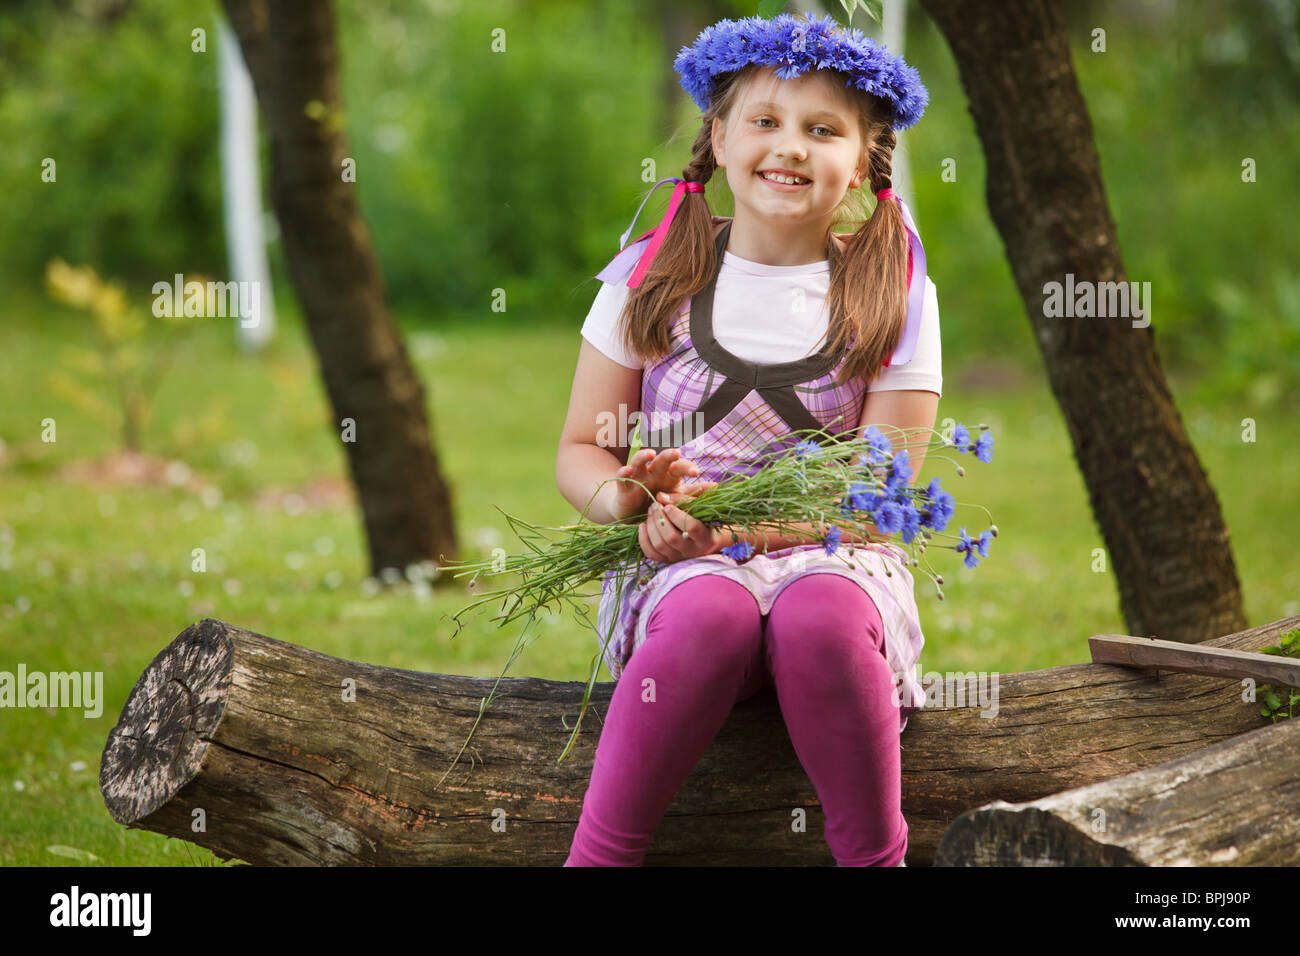 Little girl with a chaplet made from blue flowers Stock Photo